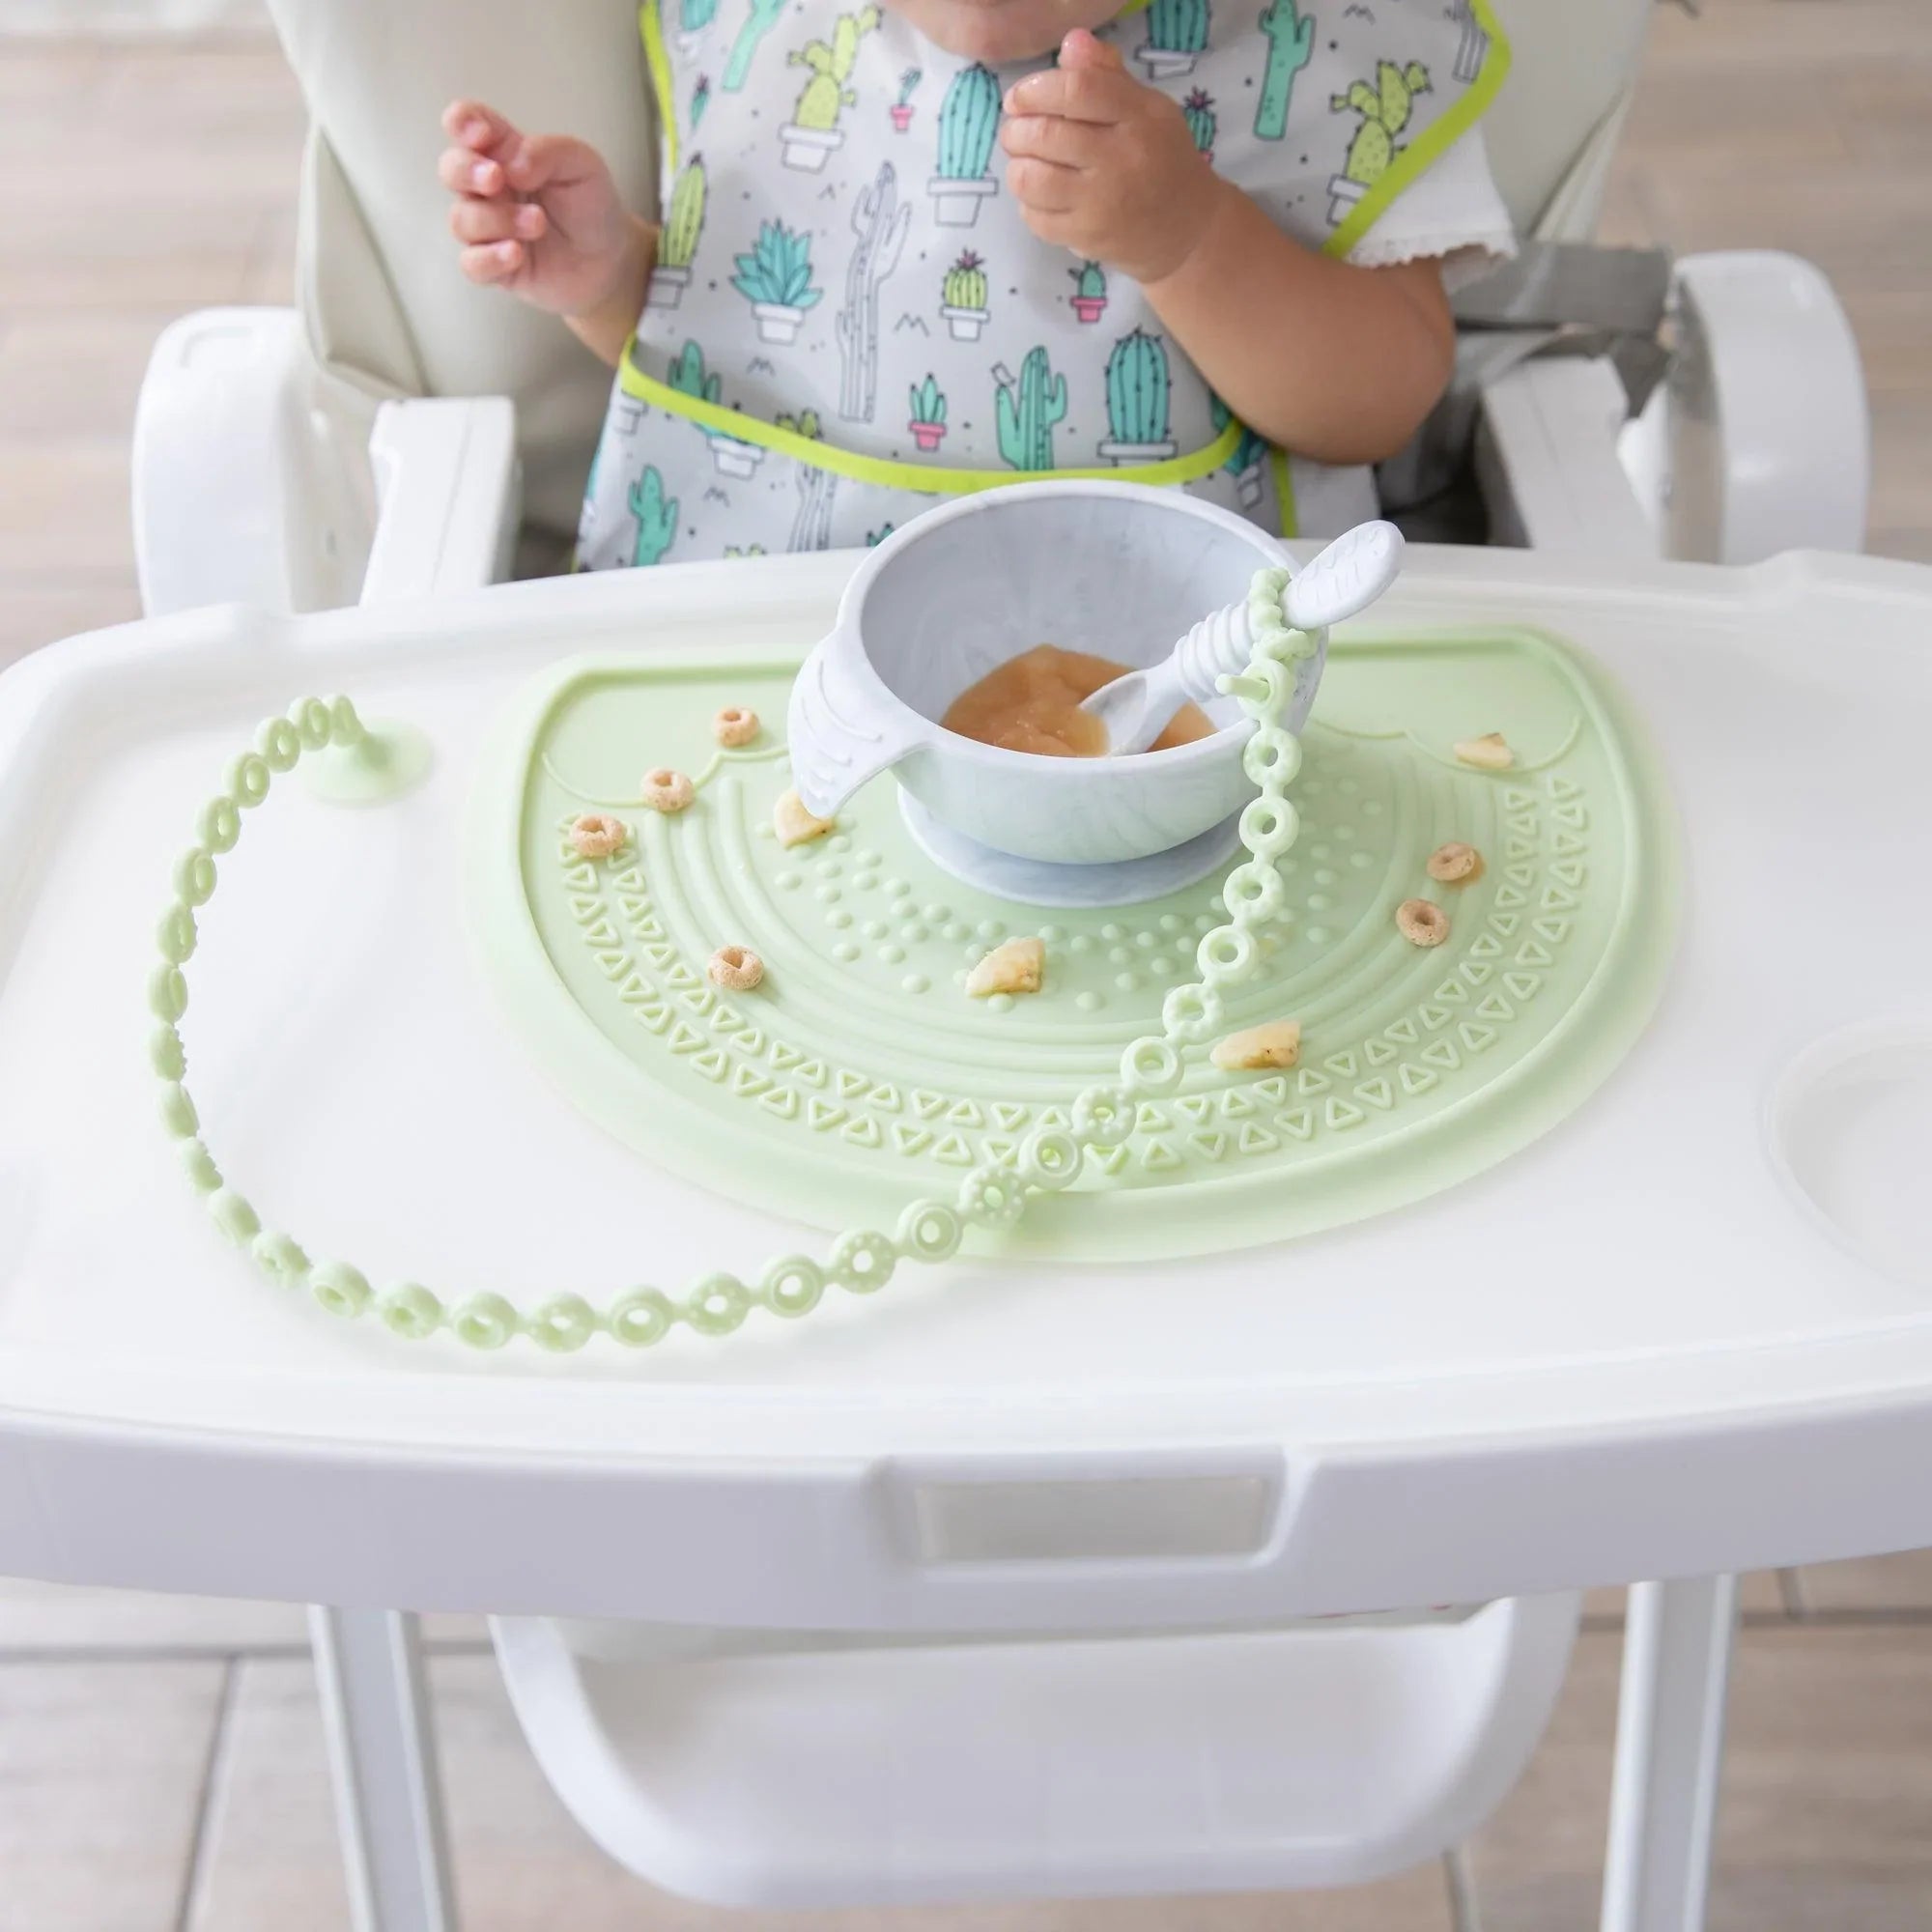 Bumkins Silicone Sensory Placemat, Baby Ages 6 Mos+ (Sage), Green